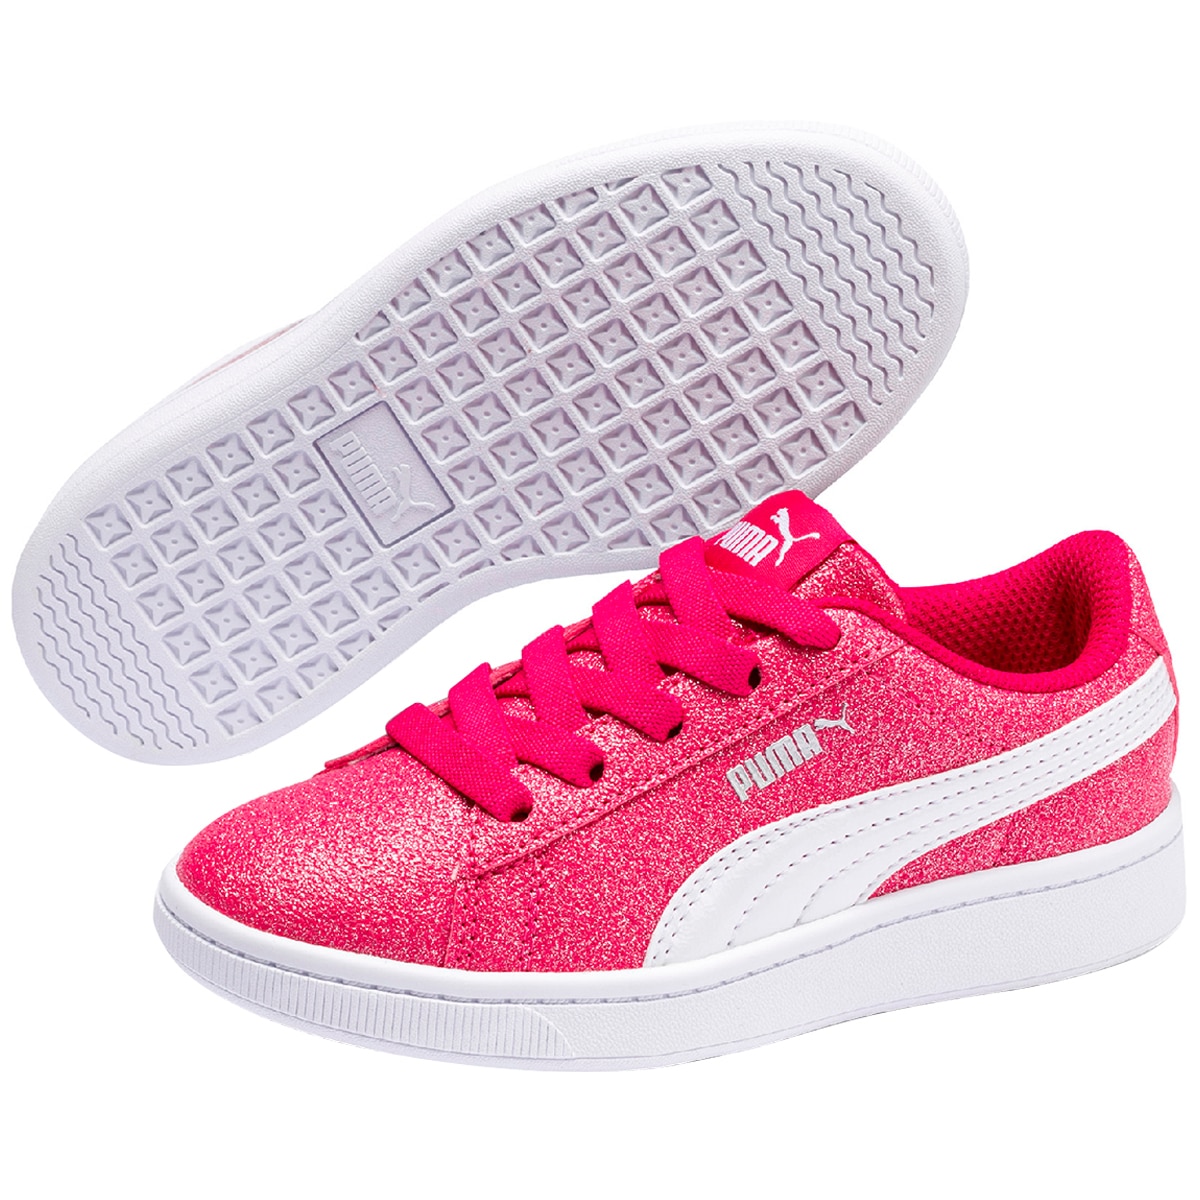 Buy > puma shoes for kids girls > in stock